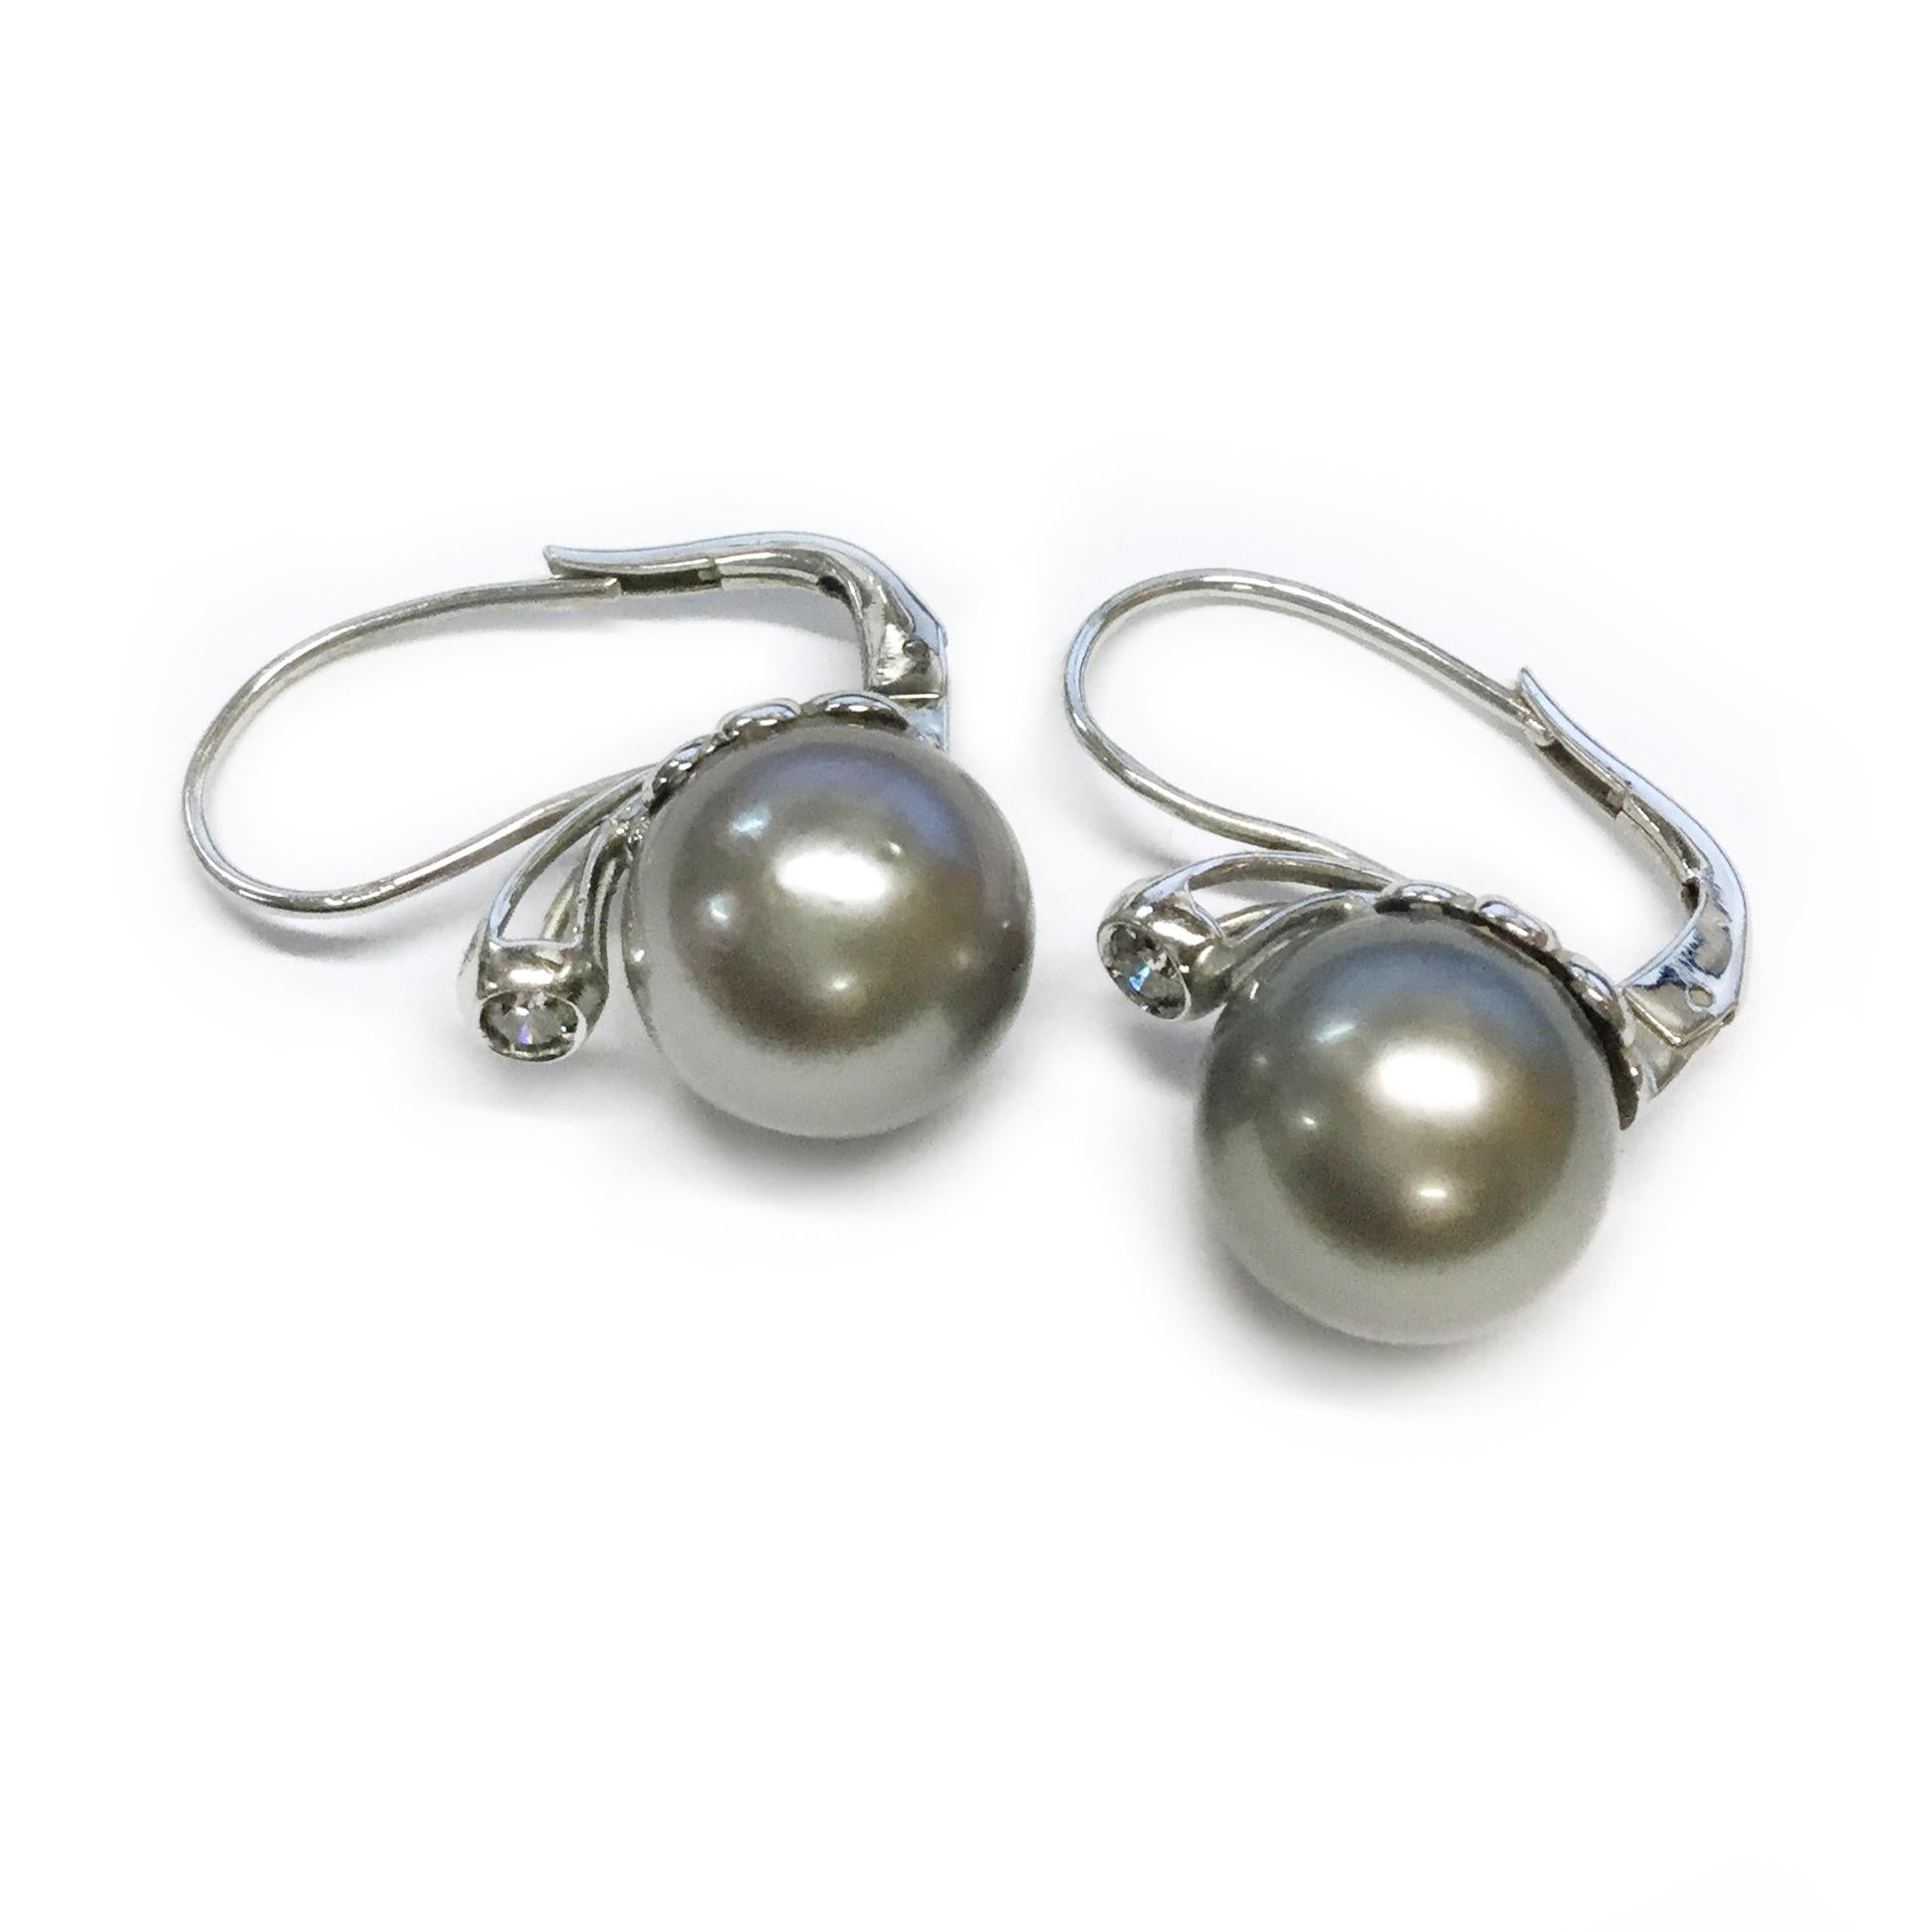 18 Karat Tested White Gold Diamond Tahitian Silver Pearl Earrings. The Pearls are 11.8mm and 11.97mm. Pearls are lightly blemished, good shape and good luster. Diamonds are I1 (G.I.A.) in clarity and I in color (G.I.A.). Diamonds are 3.2mm and have